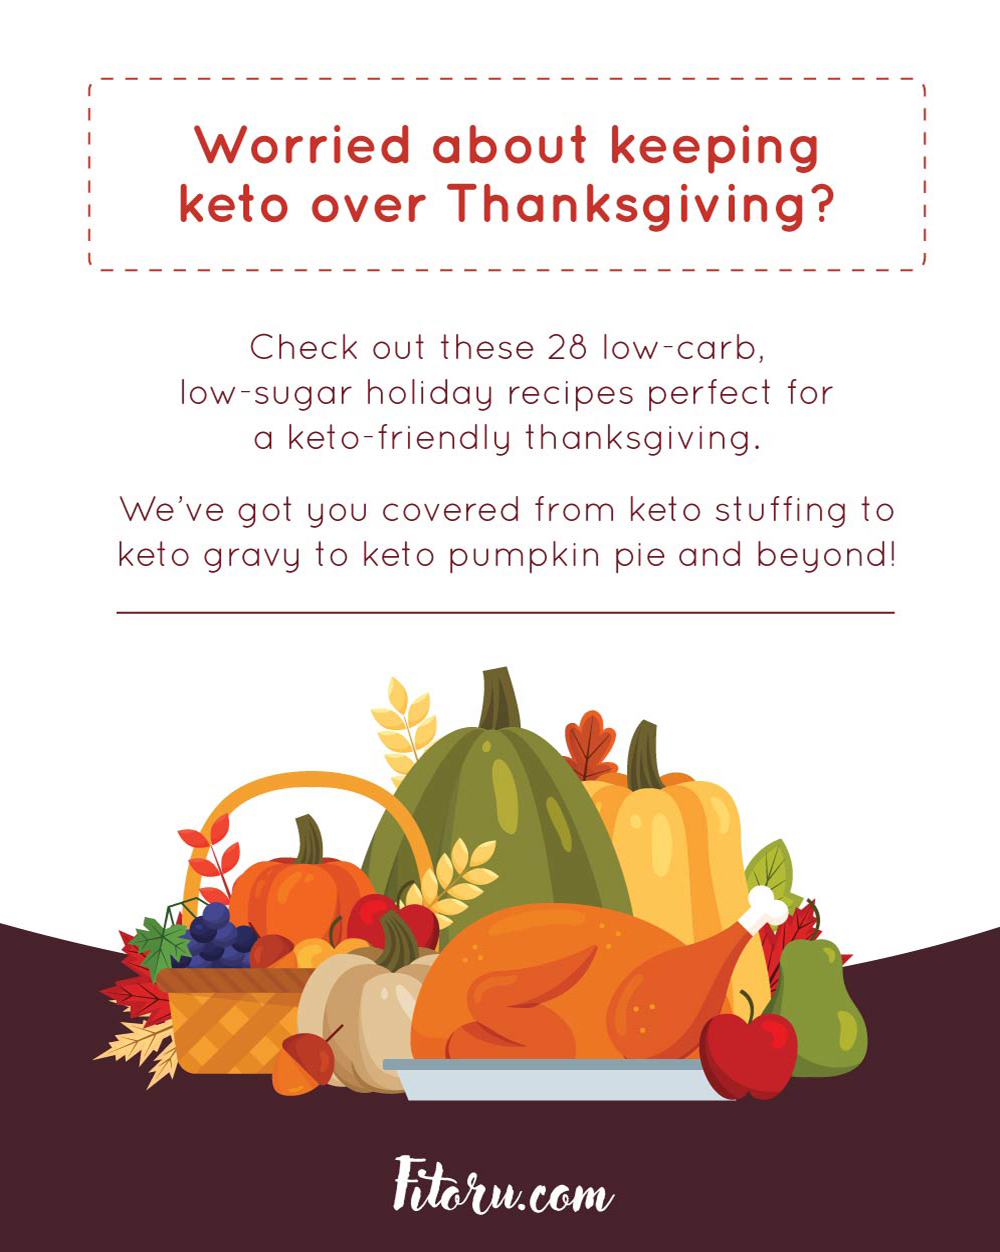 Tips for a totally keto Thanksgiving meal.